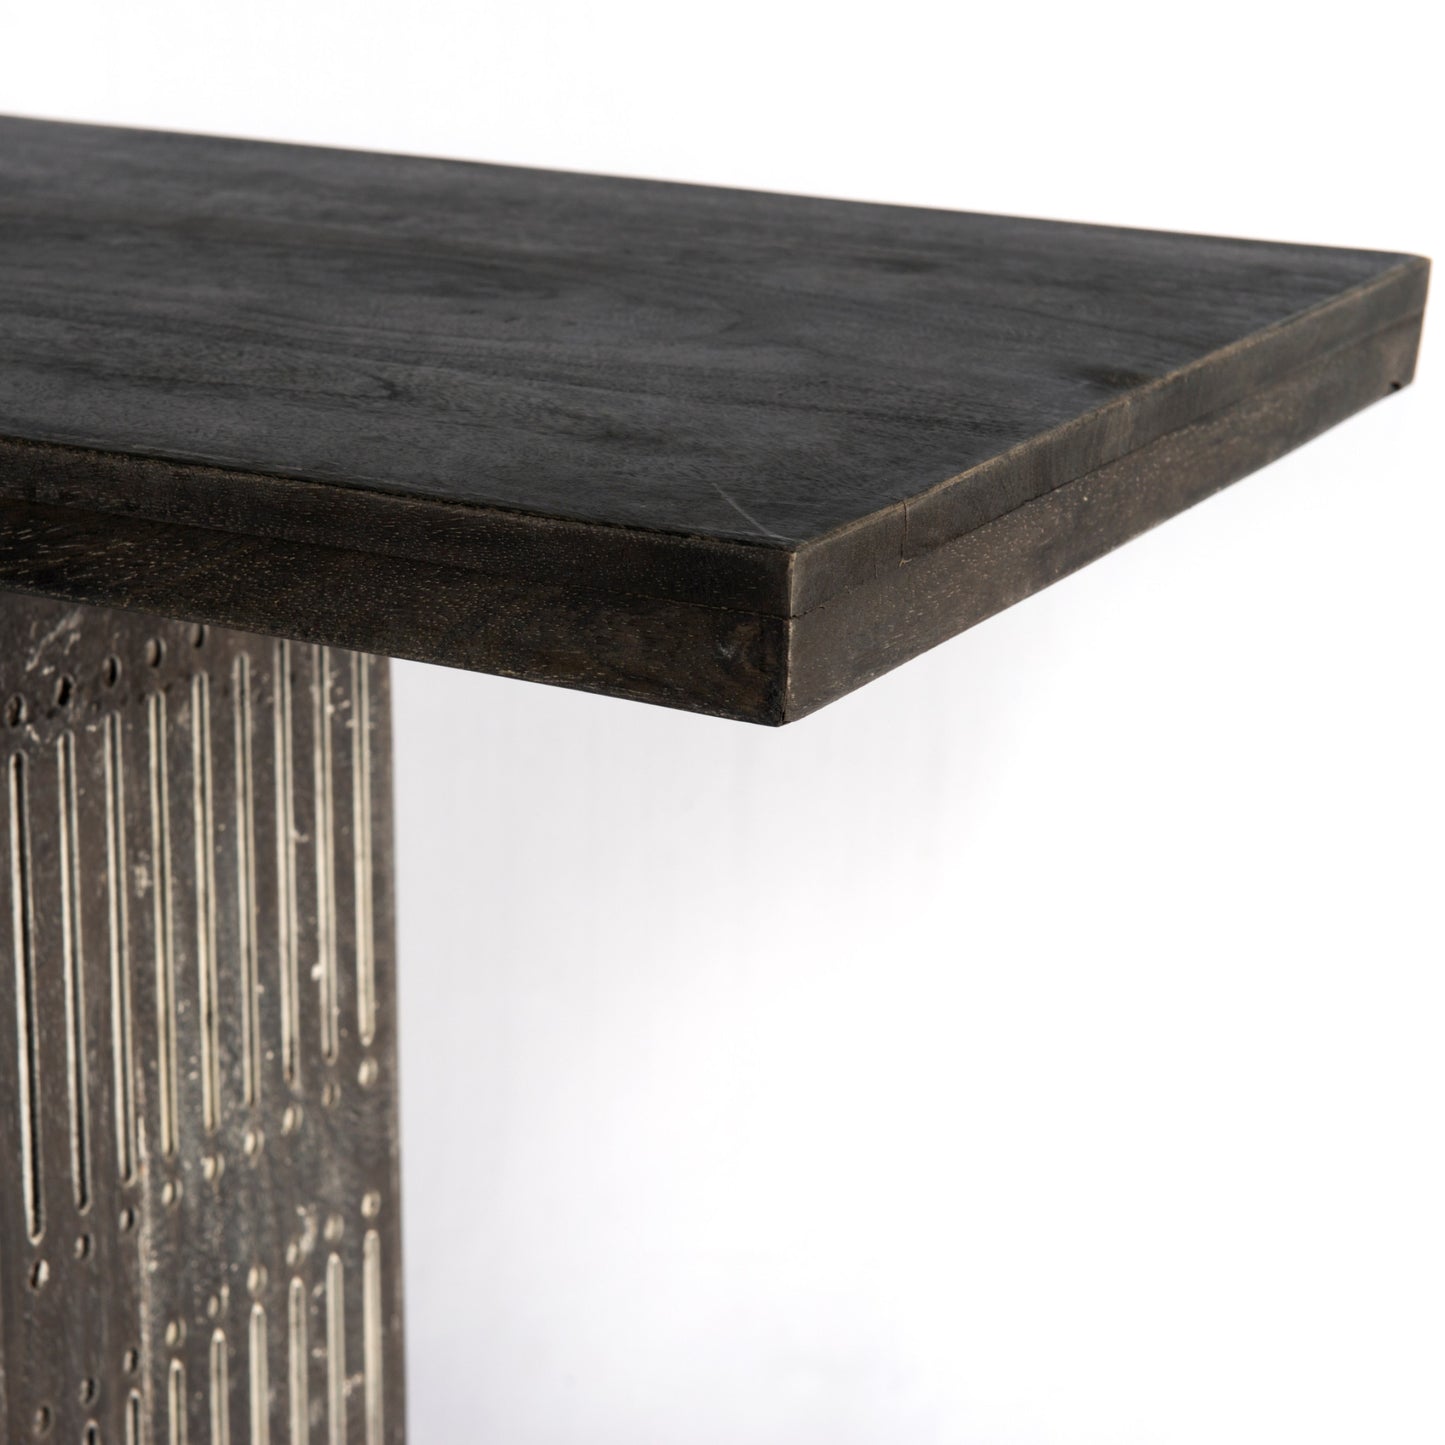 54" Brown Solid Wood Distressed Pedestal Console Table